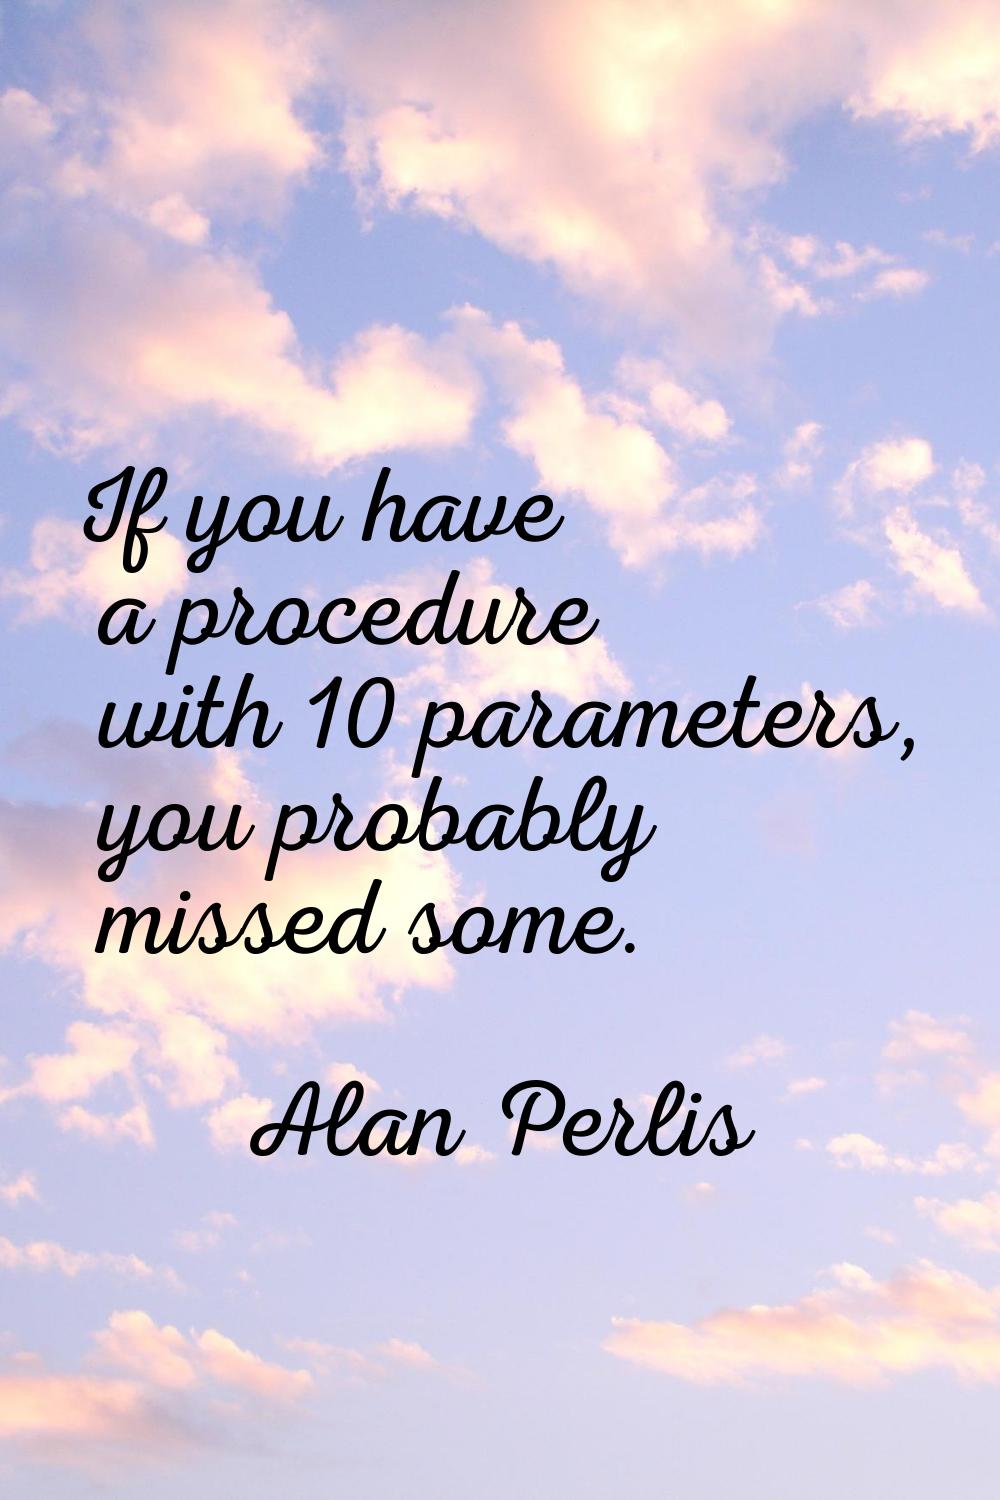 If you have a procedure with 10 parameters, you probably missed some.